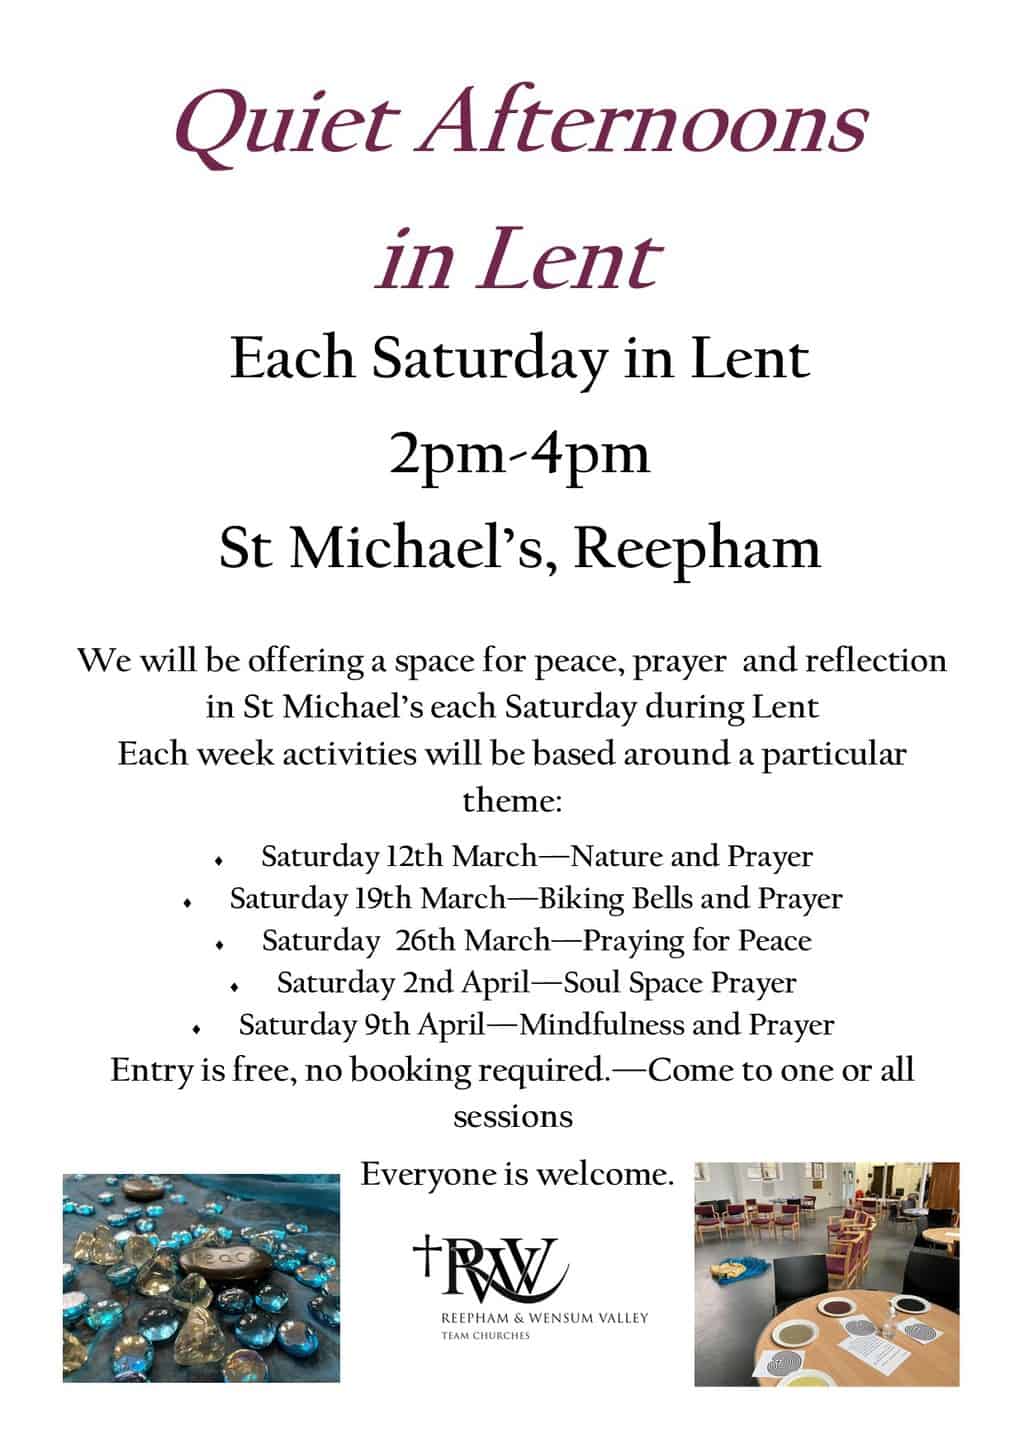 Quiet Afternoons In Lent – New Sessions In Reepham Offer Space For Peace, Prayer And Reflection.